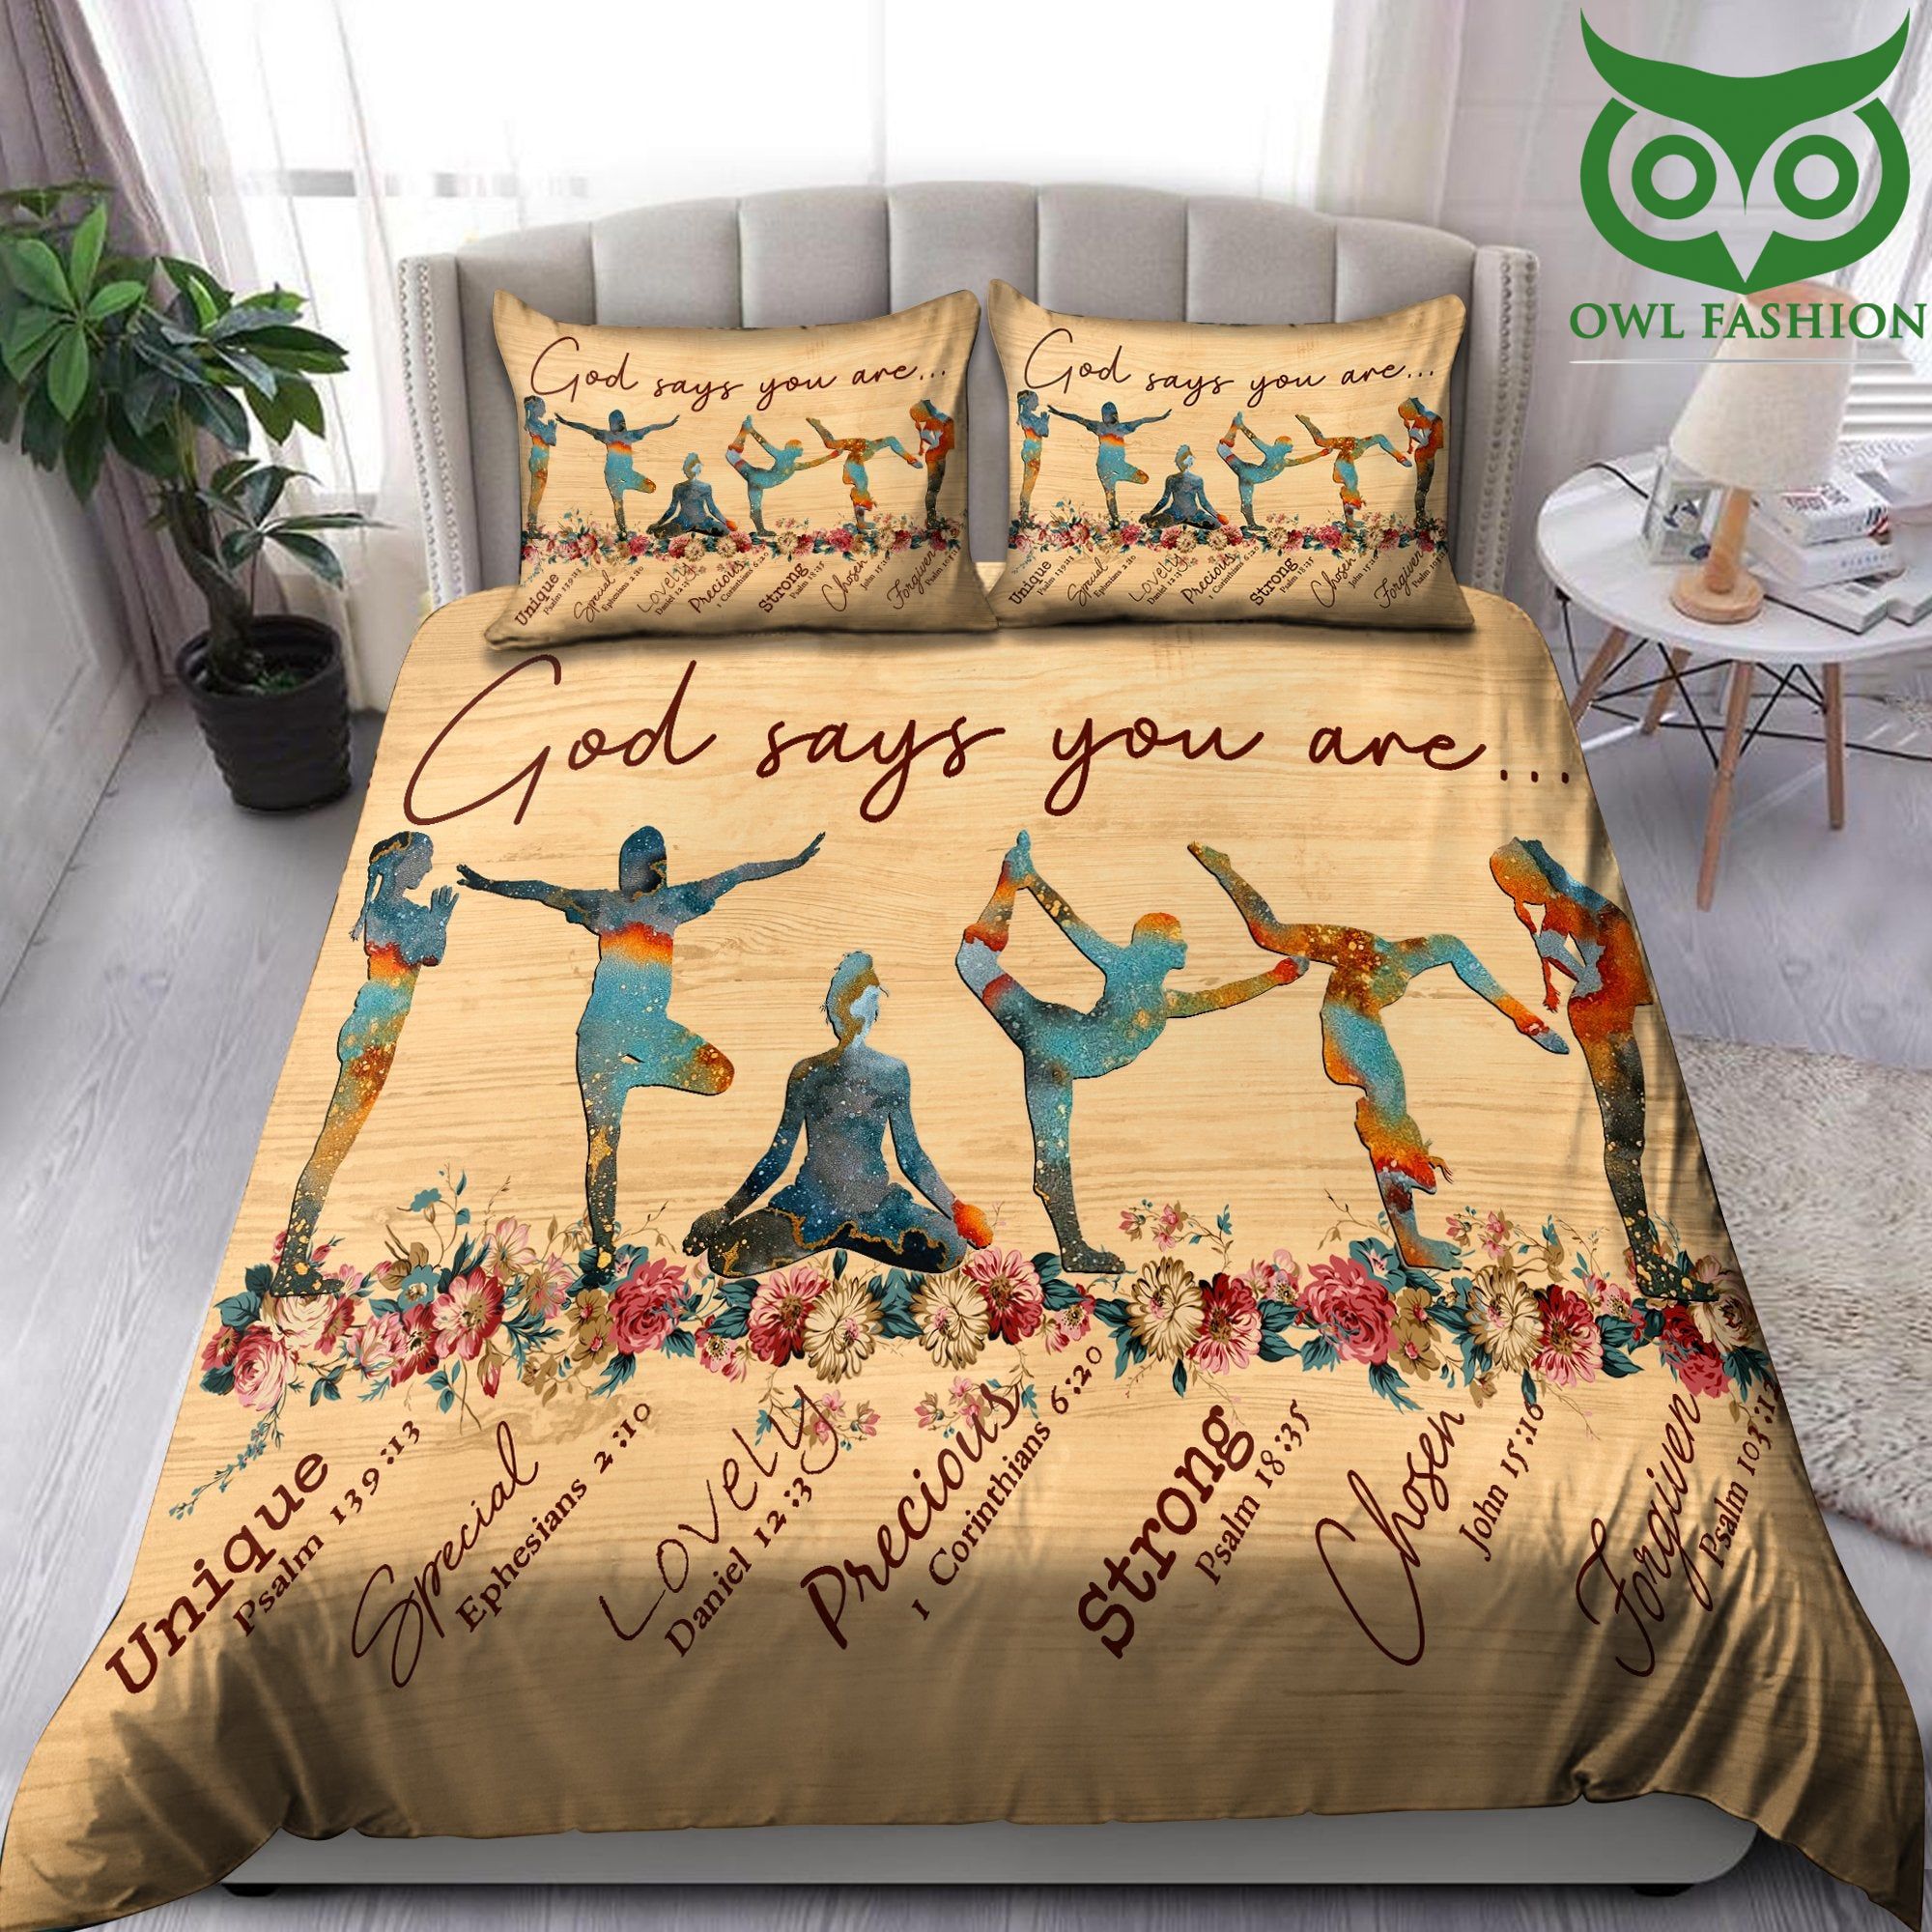 38 Yoga Love Peace Life Limited God say you are Bedding set